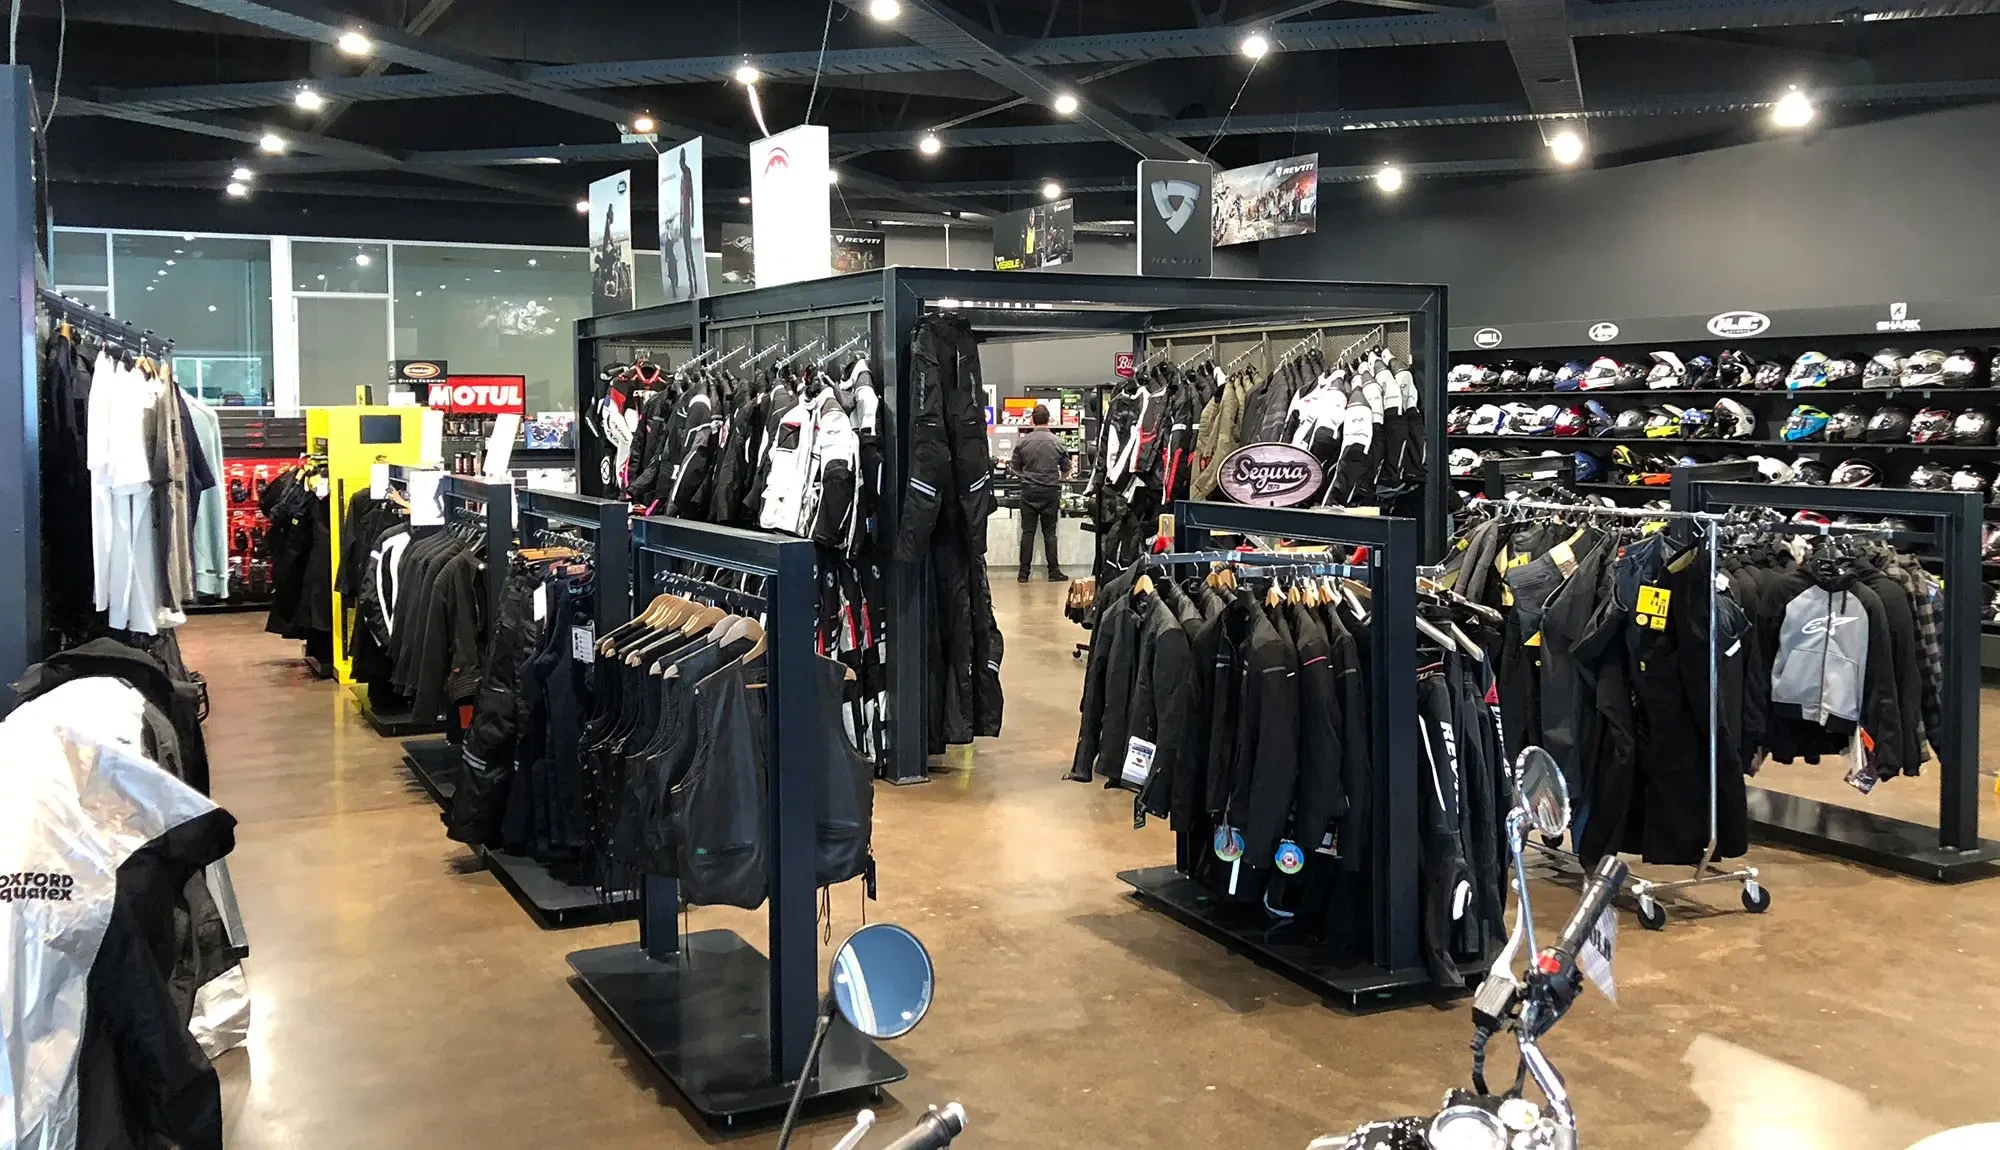 Brisan motorcycles parts and accessories section - wide angle showing range of pants, jackets, helmets and accessories